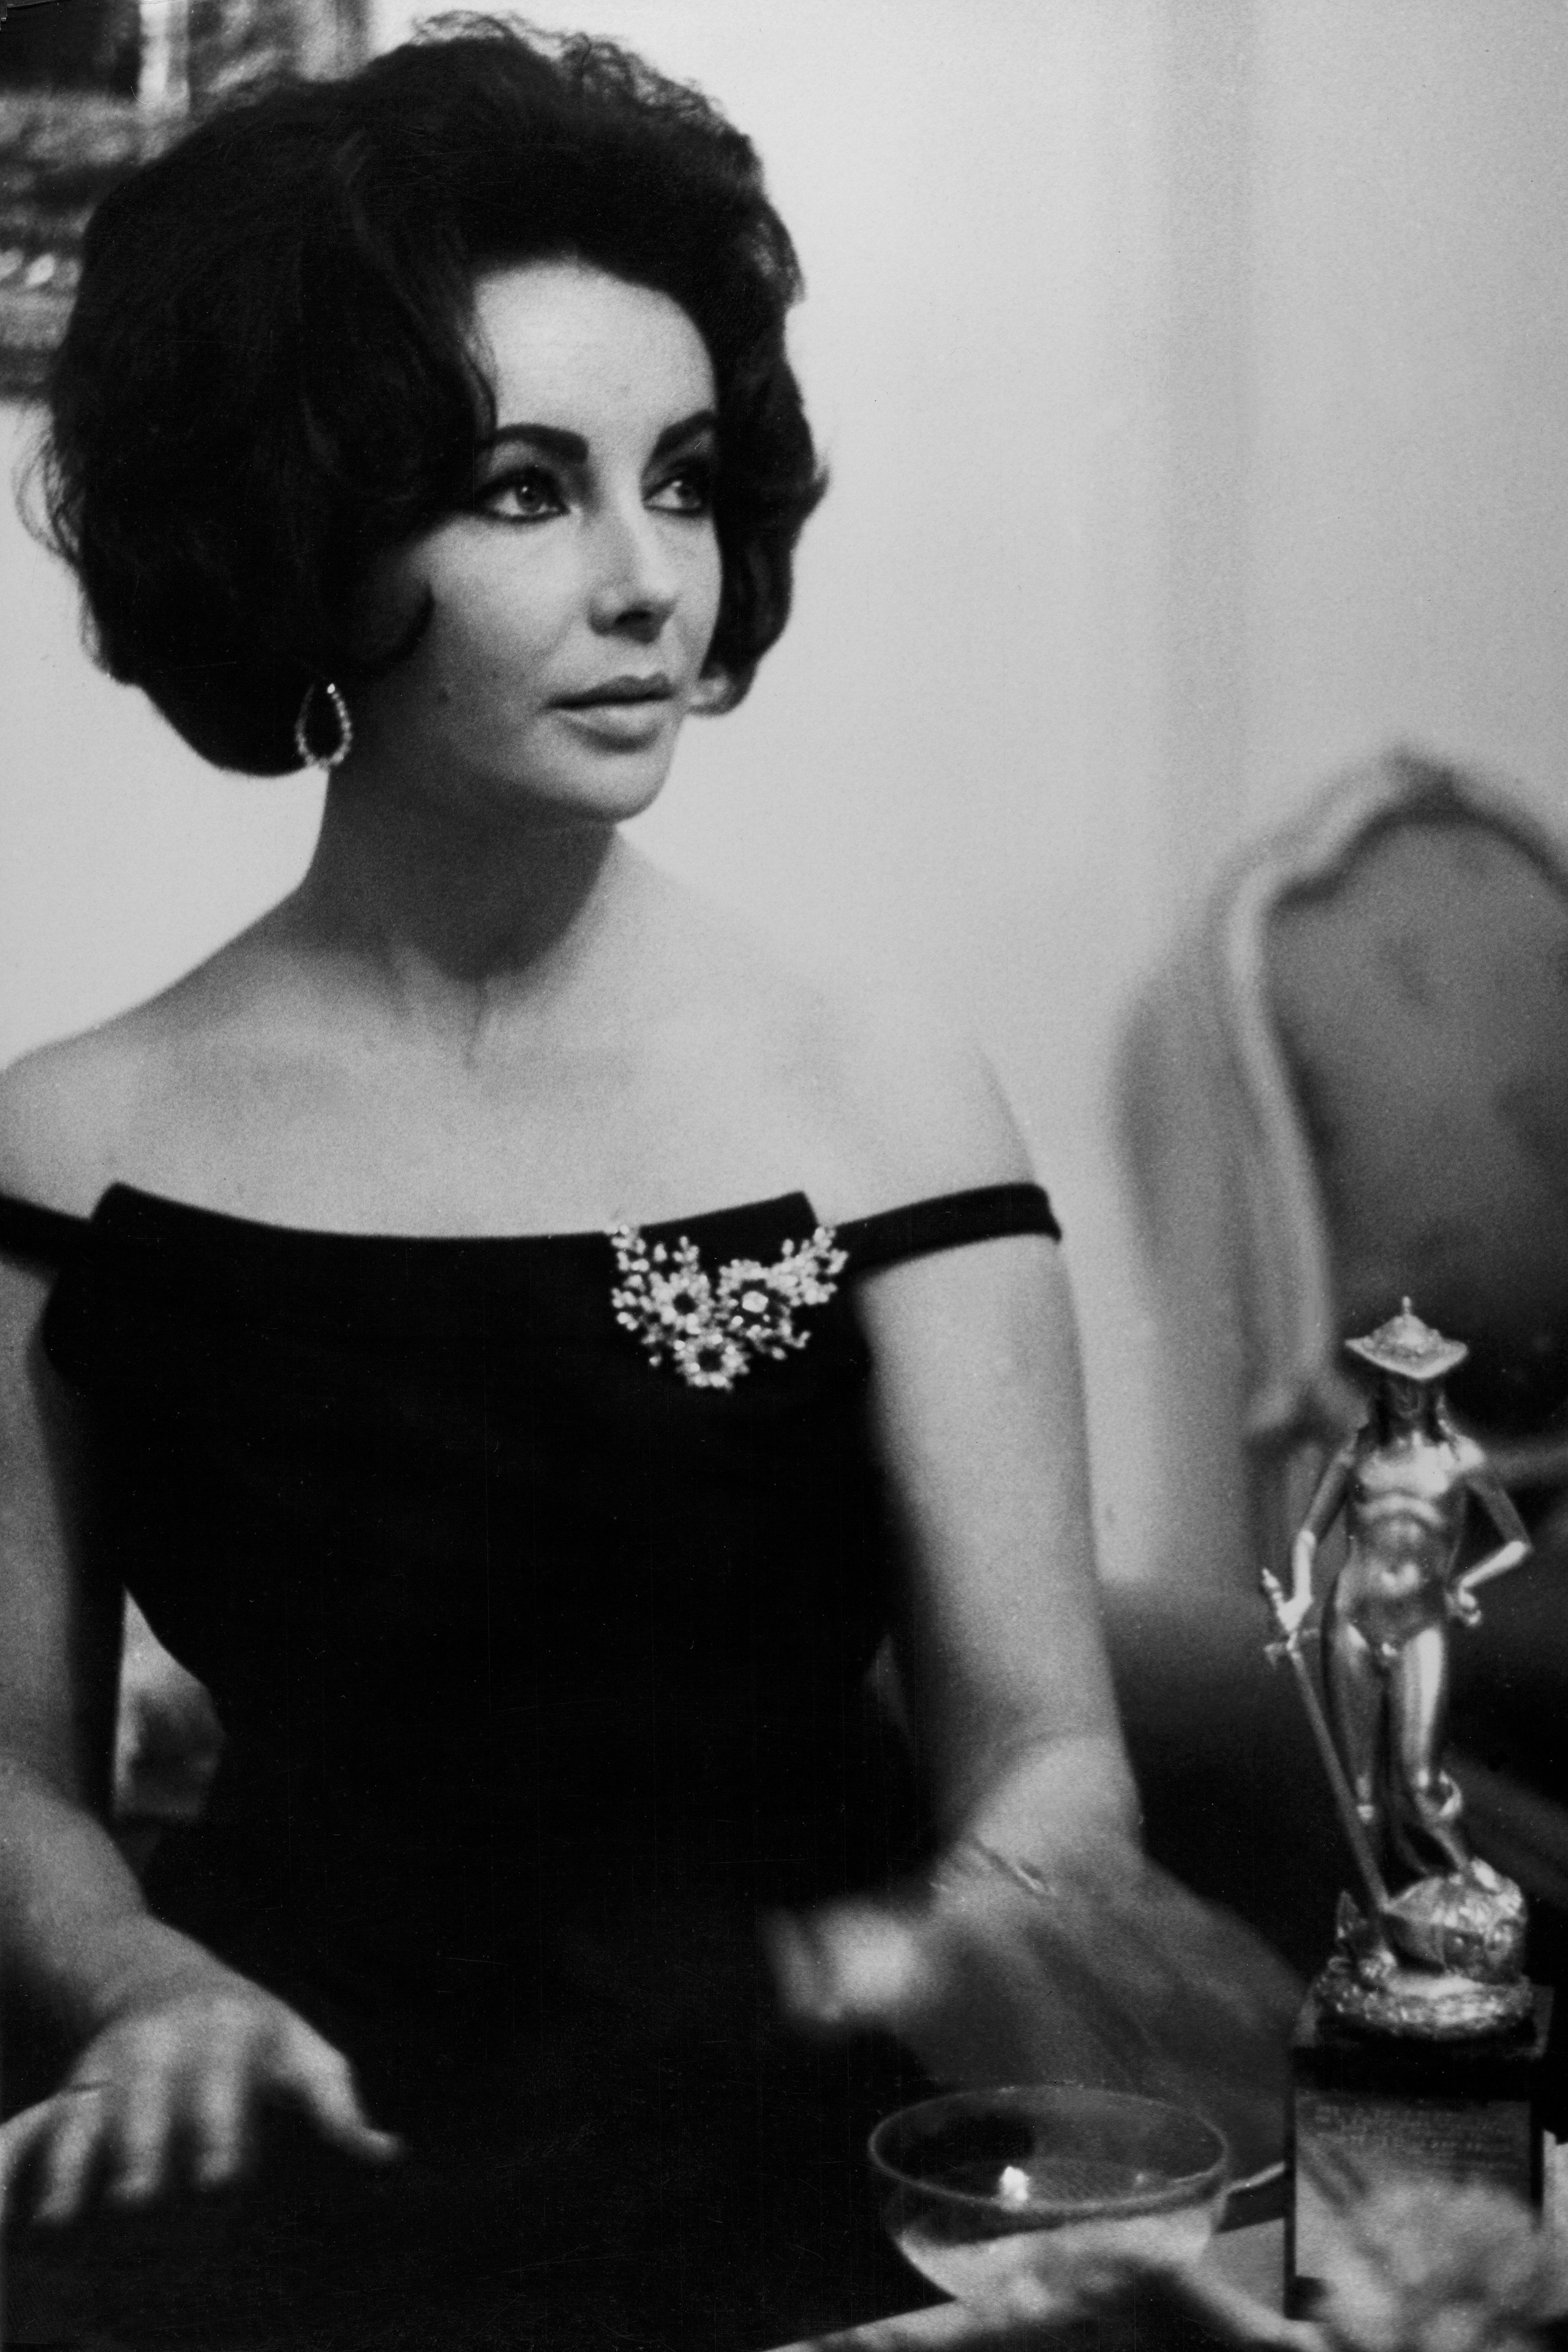 ROME ITALY  JANUARY 1962 Movie Star Liz Taylor and her trophy during the ceremony in January 1962 in Rome Italy.